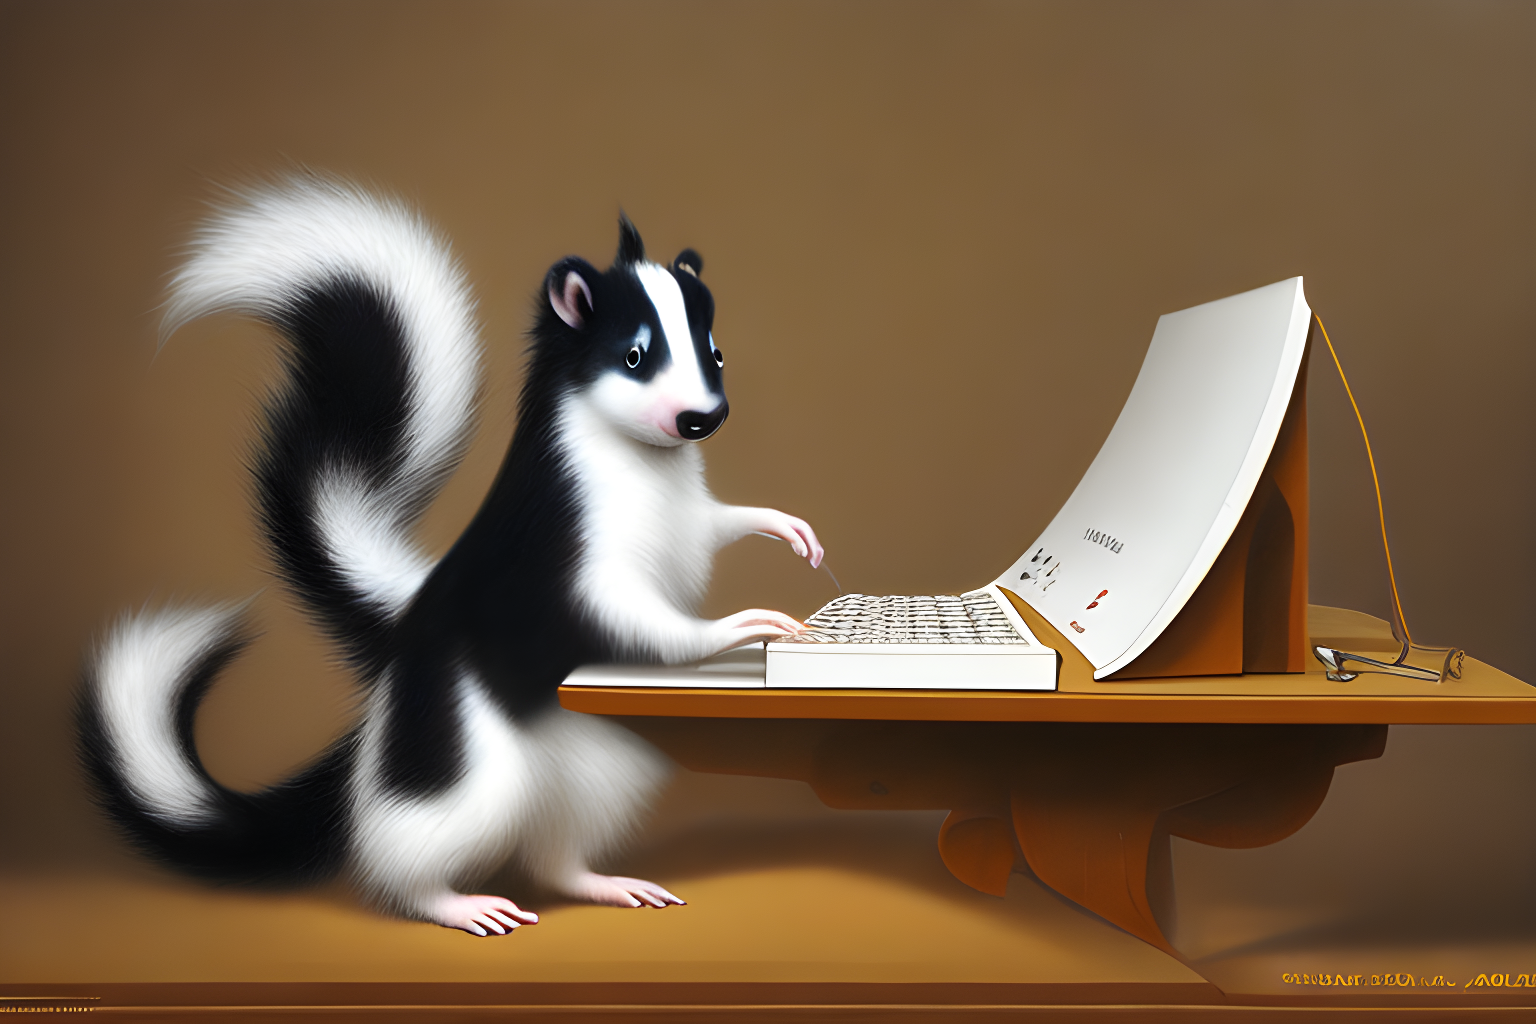 mdjrny-v4 style yet another skunk smelling a stink keyboard